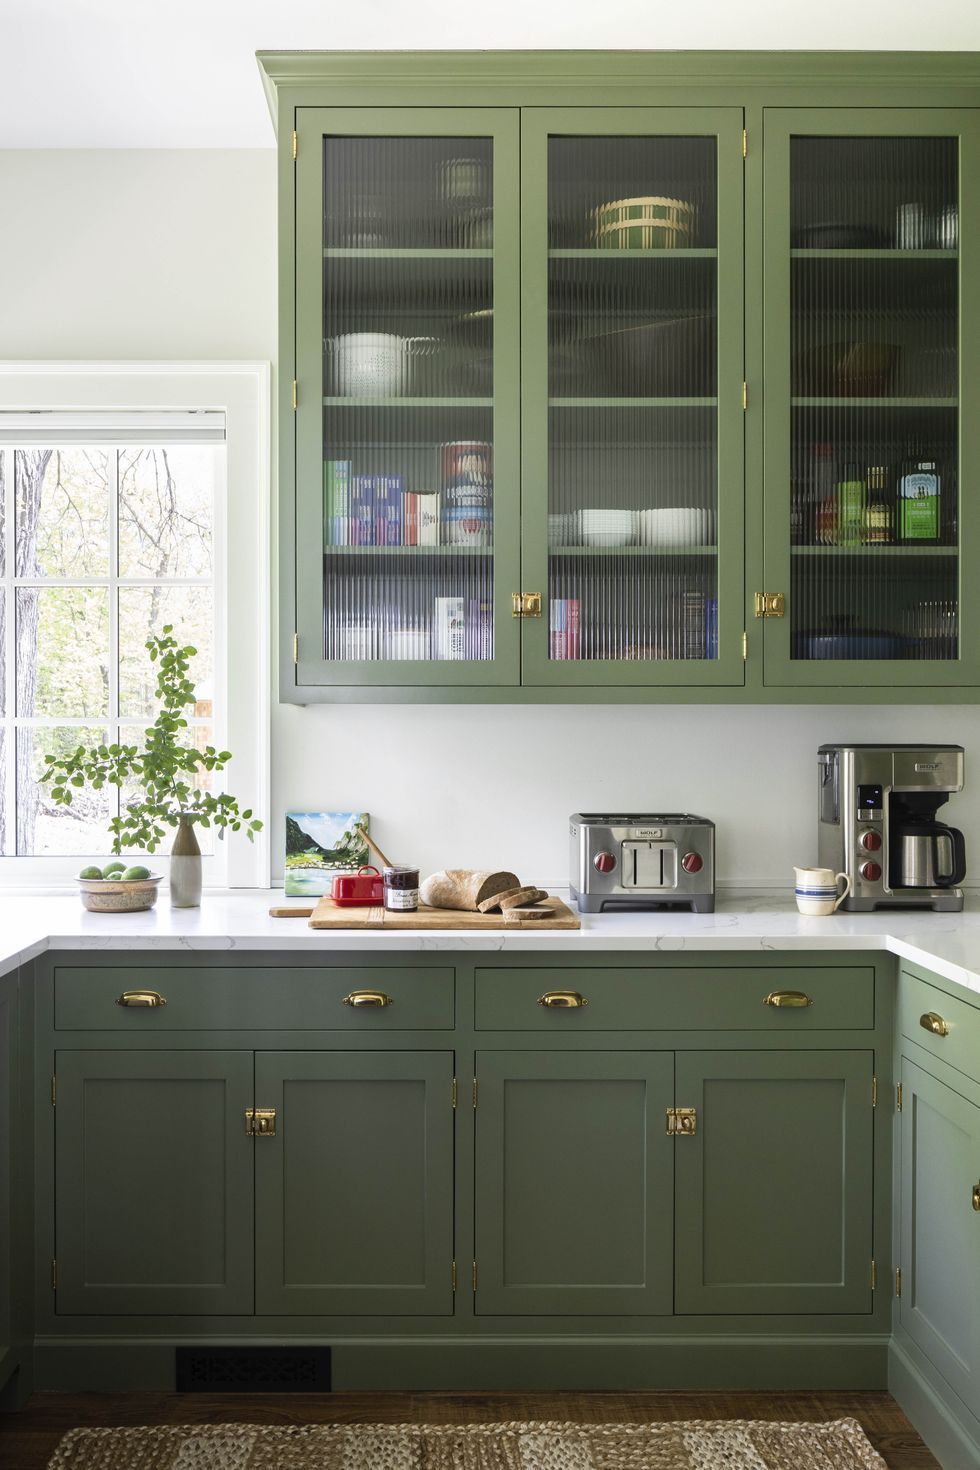 green kitchen cabinets with ribbed glass upper cabinet windows, there is a board with jam and bread on the counter